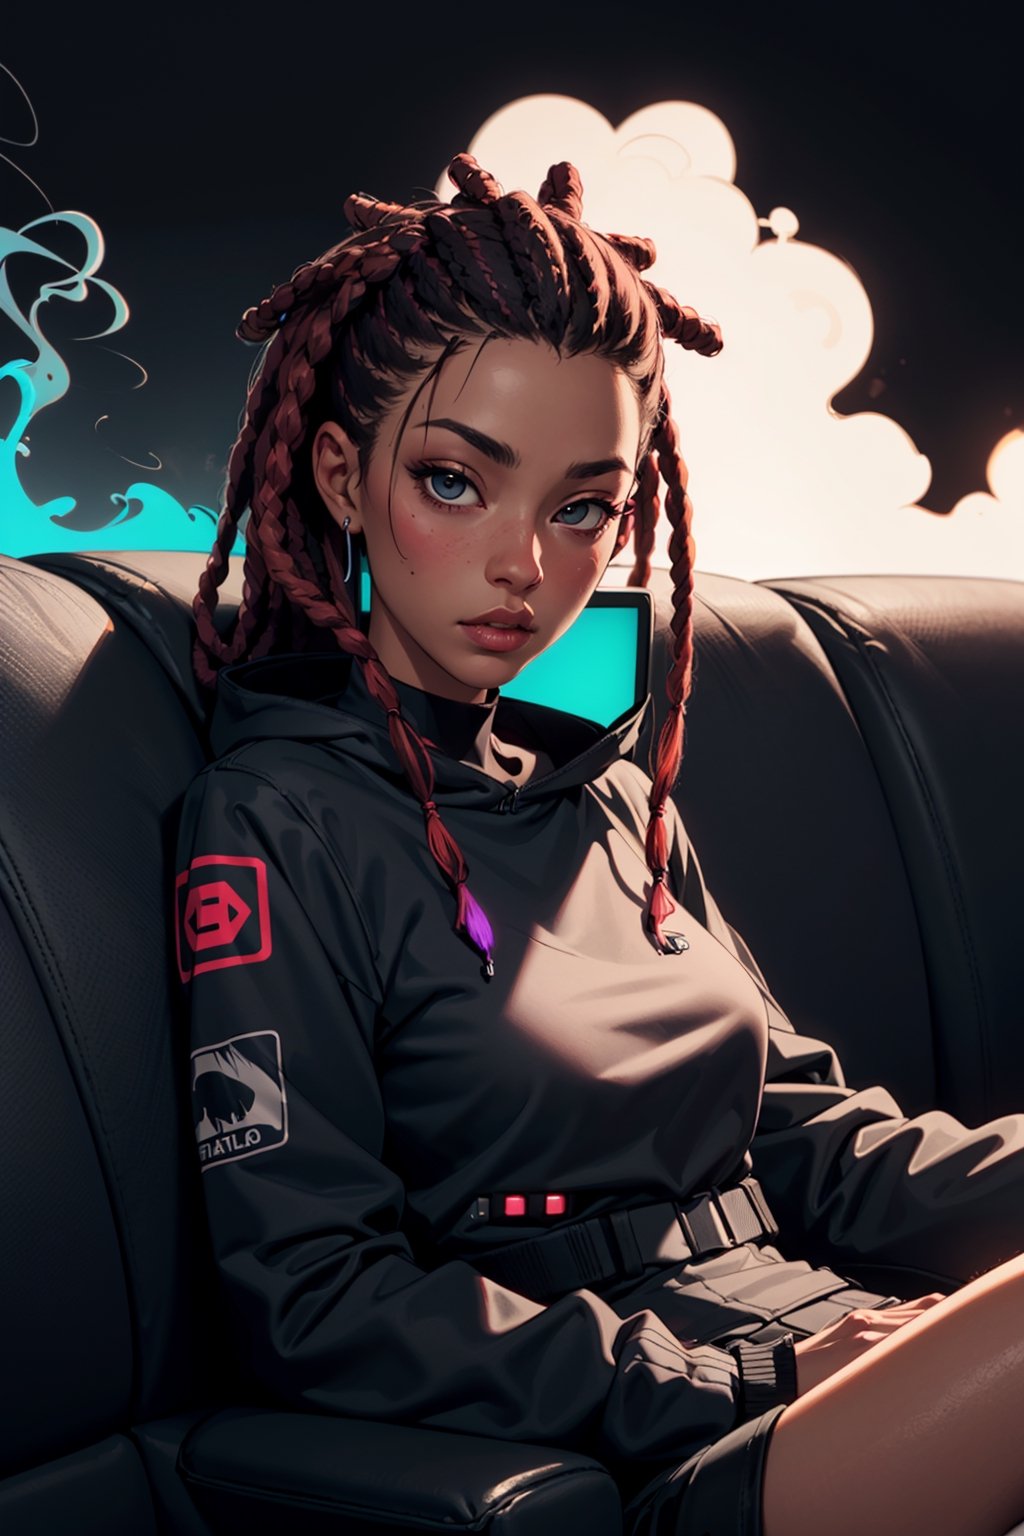 ebonyskintone,woman with locs,head leaned back off couch, blowing smoke from blunt,eyes lookingat camera, cyberpunk style background,
